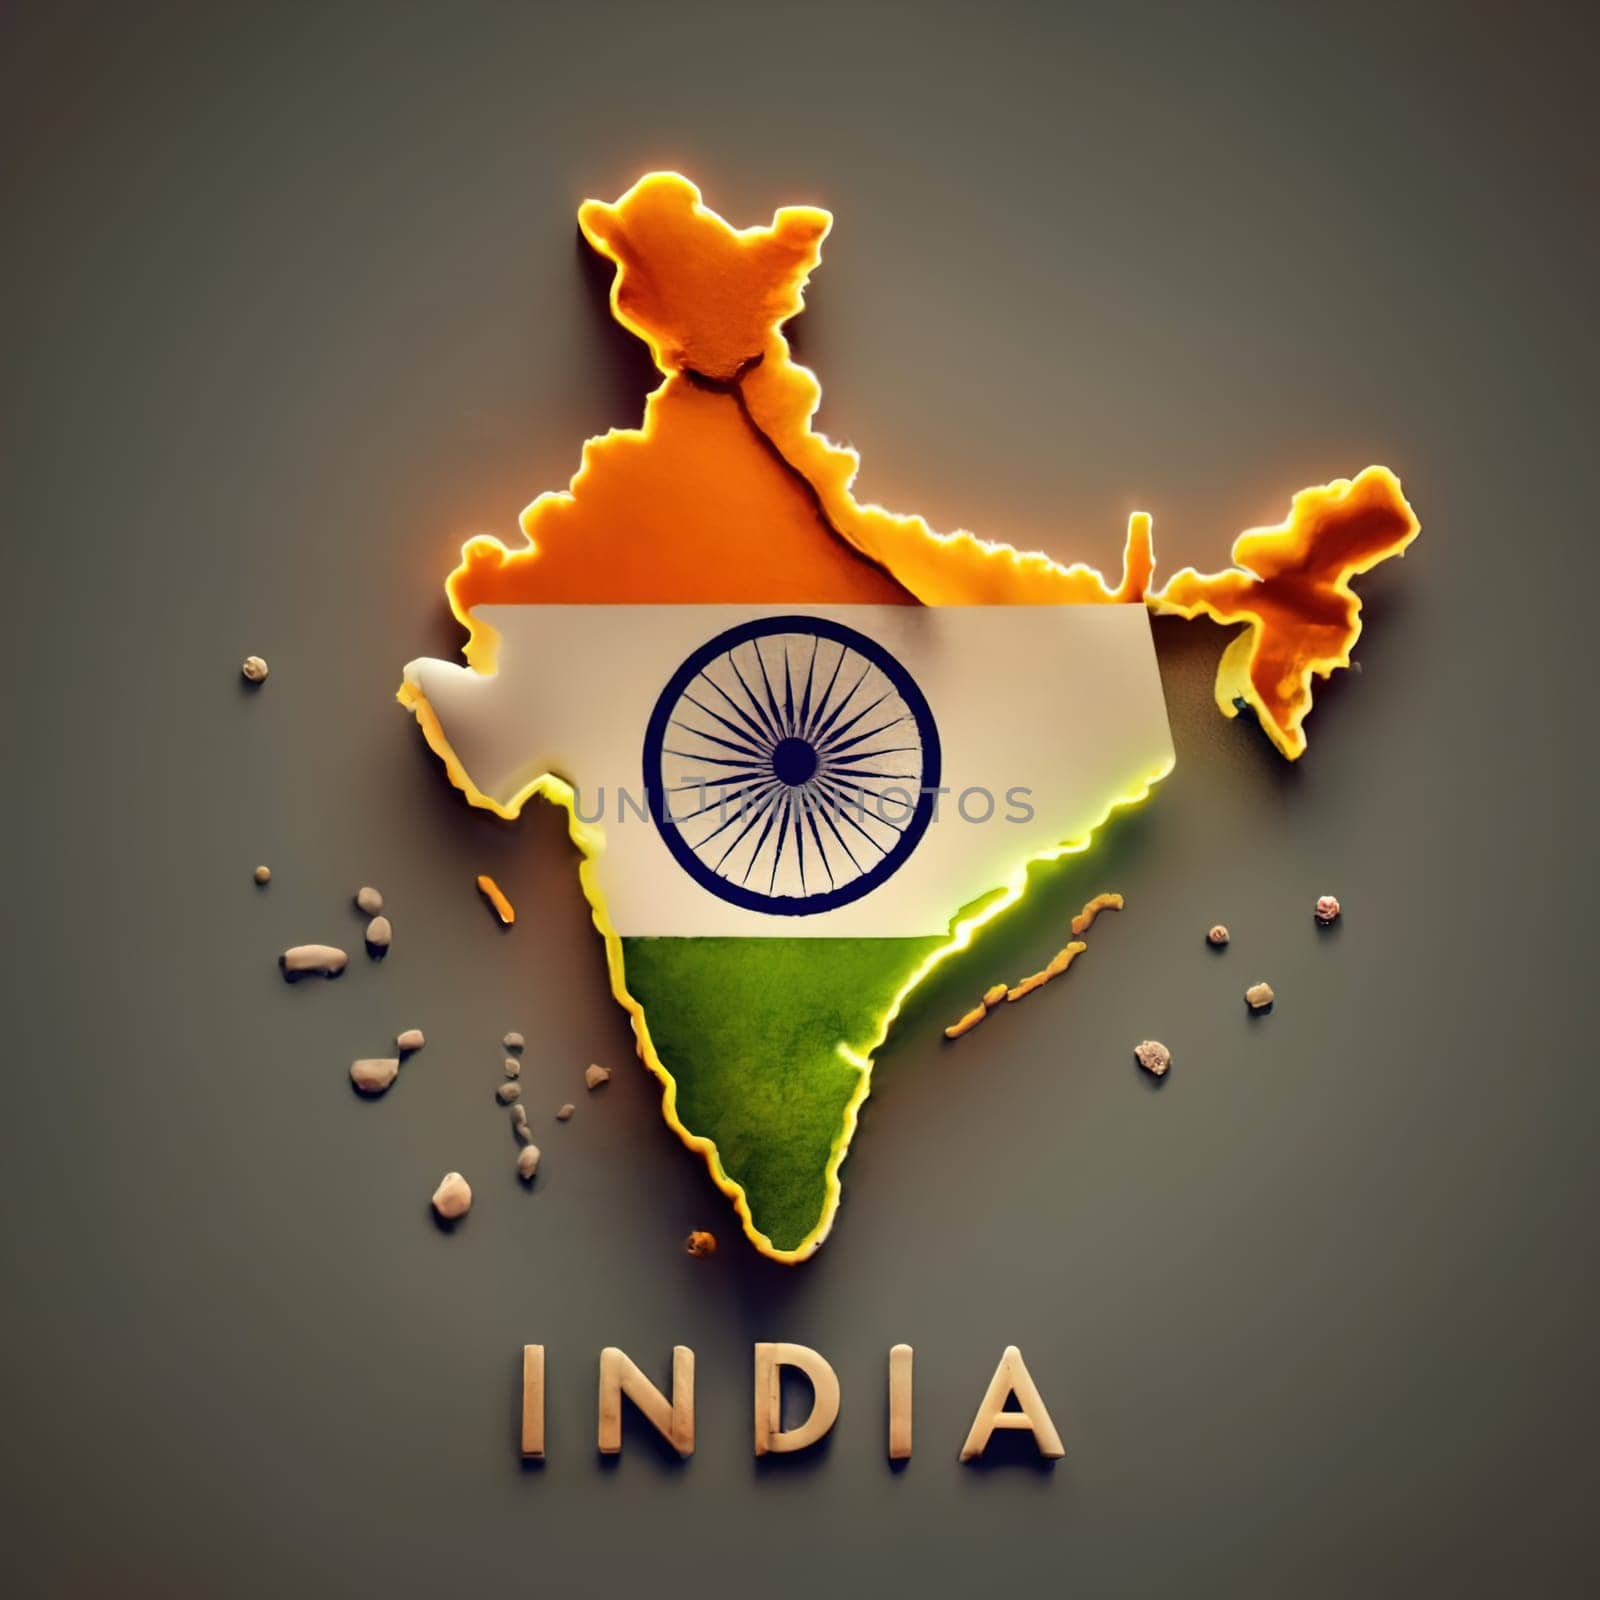 Glowing 'INDIA' in One Line Across Indian Map with Three Colors Splash Paint - High Detail, Dark Background by igor010